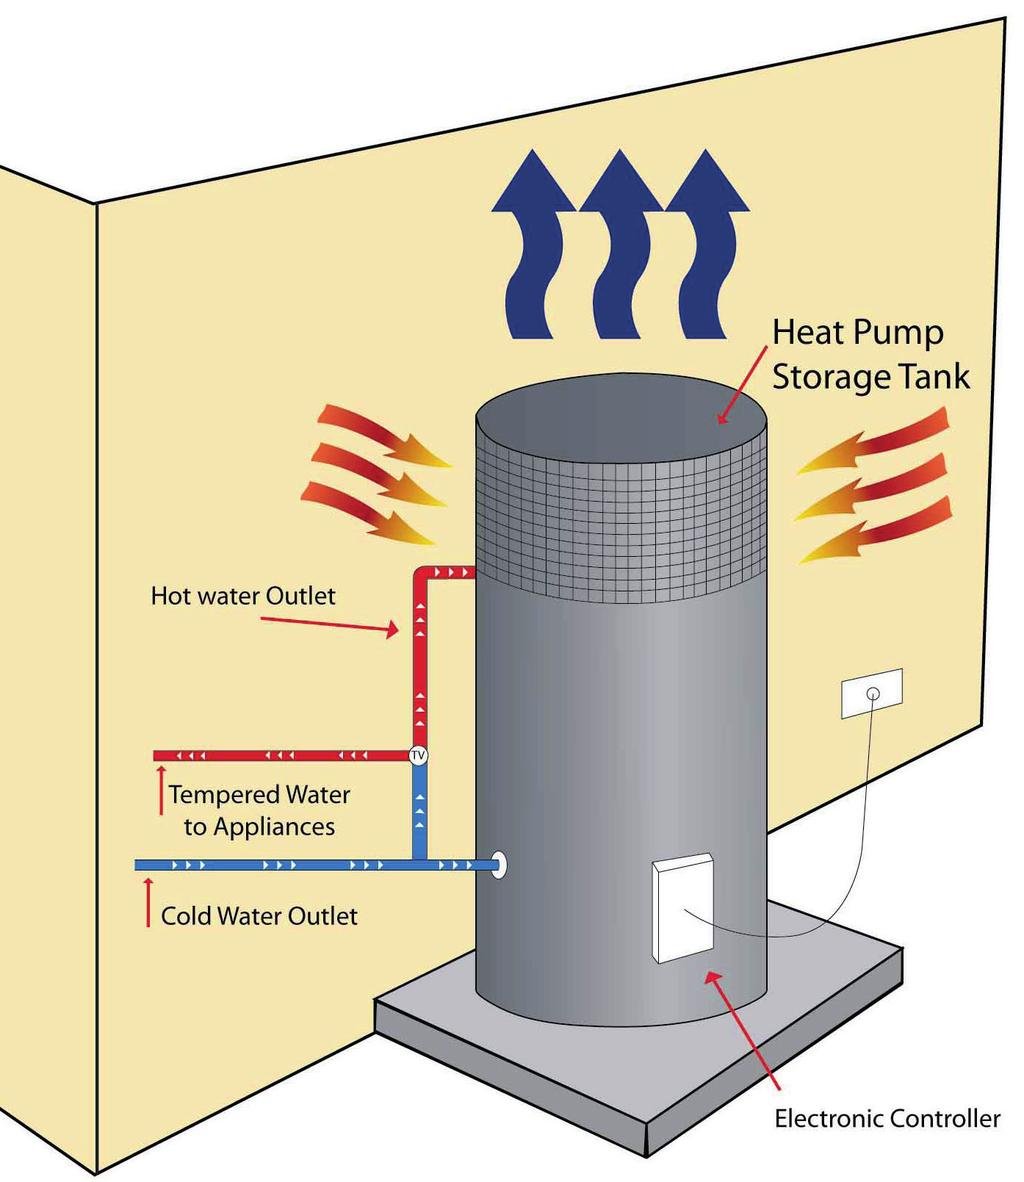 The pumps operate like a refrigerator but in reverse. Ambient air is used to heat a refrigerant, which converts to a gas. The gas is then compressed, expelling heat, which is transferred to the water.